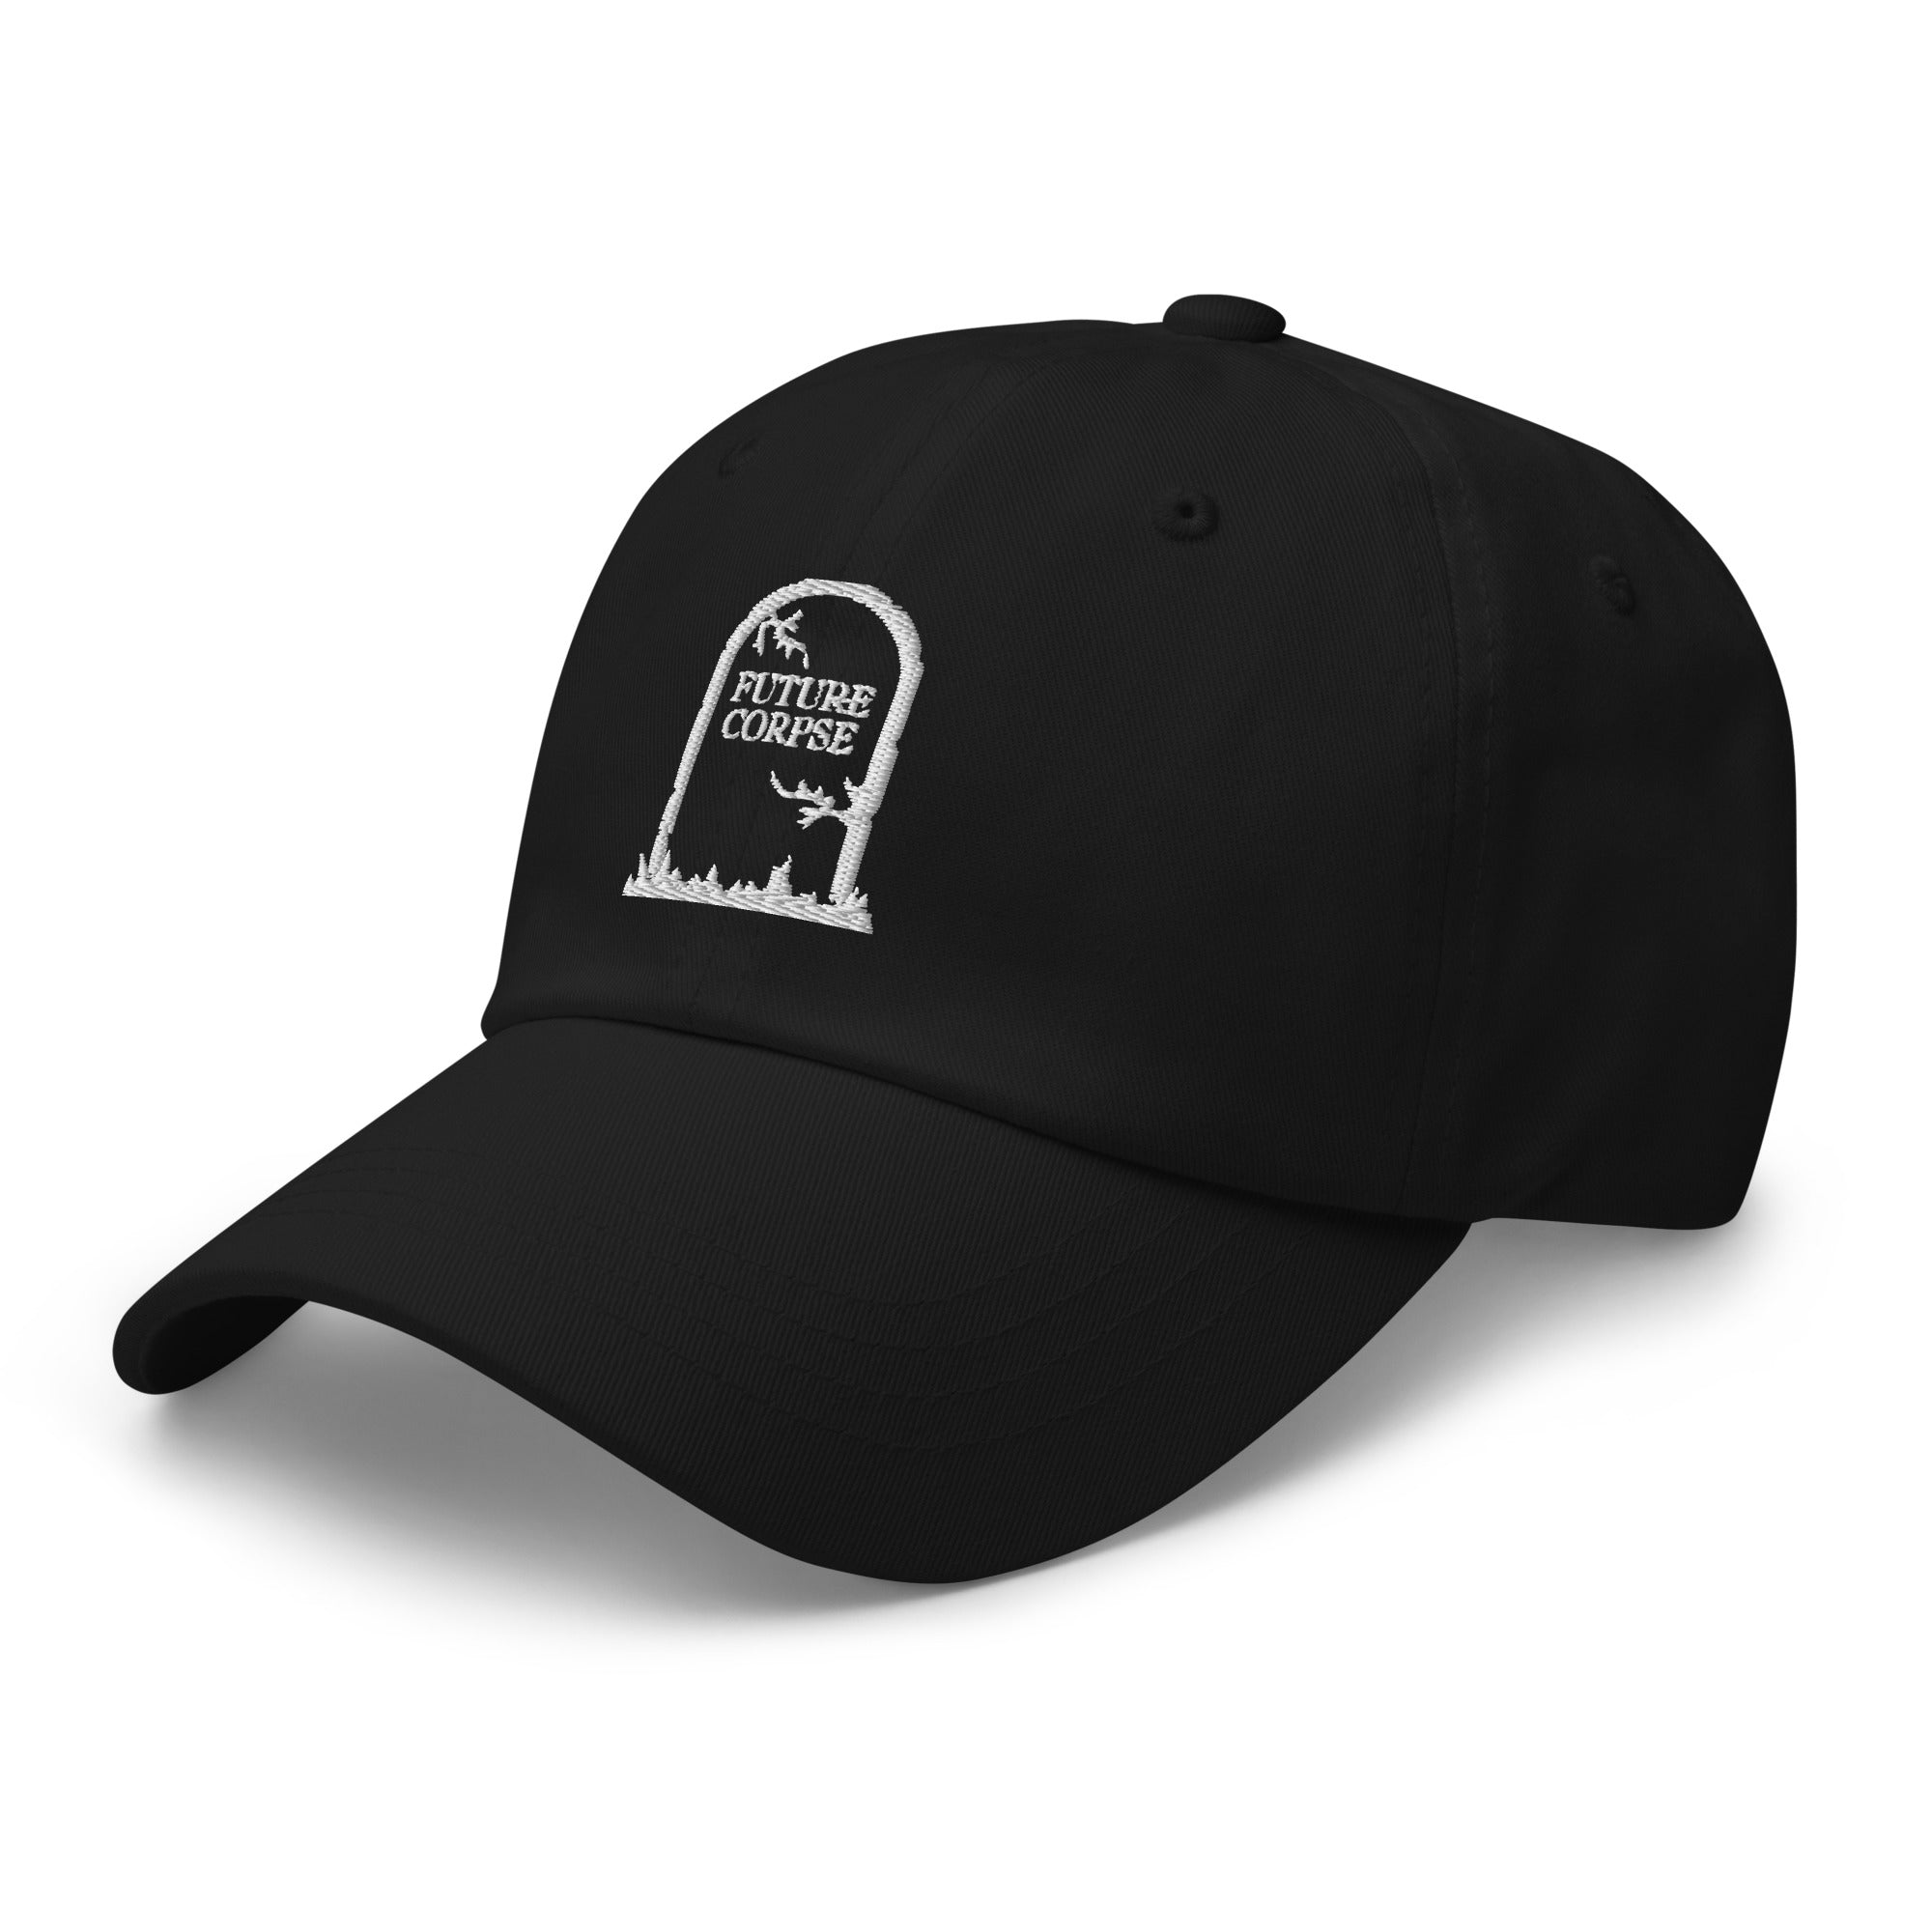 Tomb Stone Future Corpse Embroidered Baseball Cap Goth Clothing Applique Dad hat - Edge of Life Designs